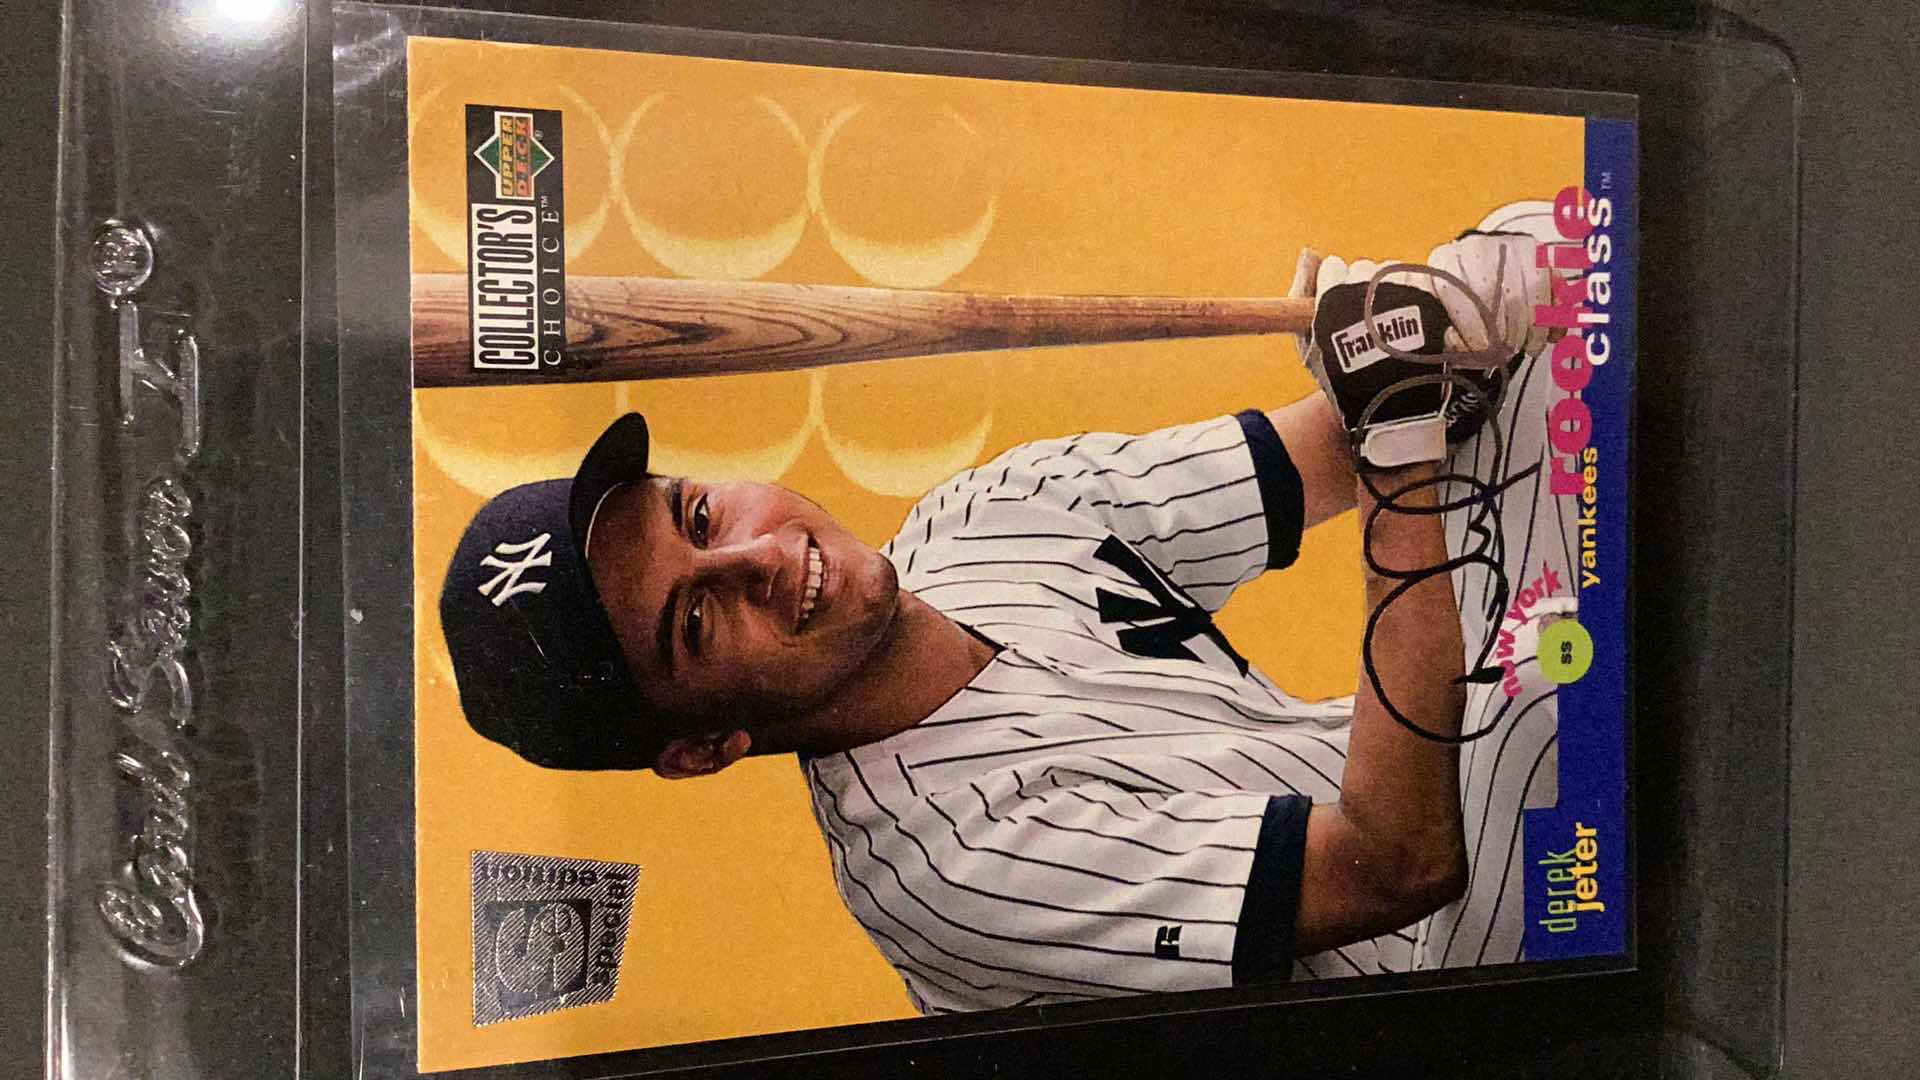 Photo 1 of 1994 UPPER DECK COLLECTORS CHOICE DEREK JETER ROOKIE CARD SPECIAL EDITION WITH FACSIMILE SIGNATURE #2